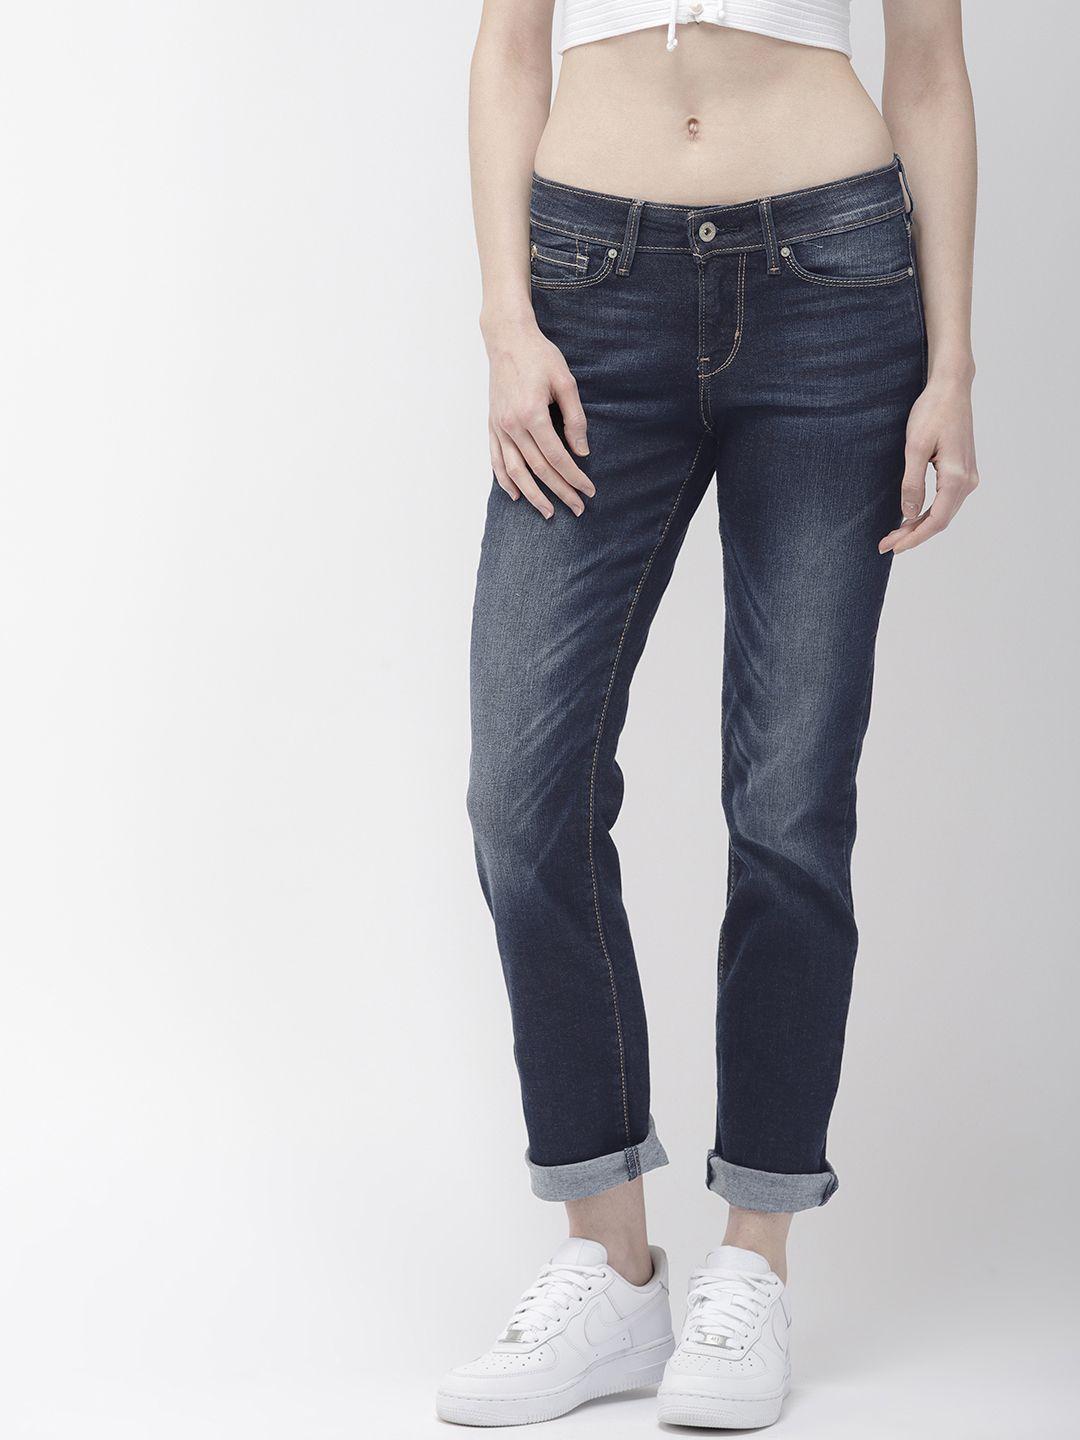 denizen-from-levis-women-blue-modern-slim-fit-mid-rise-clean-look-stretchable-jeans